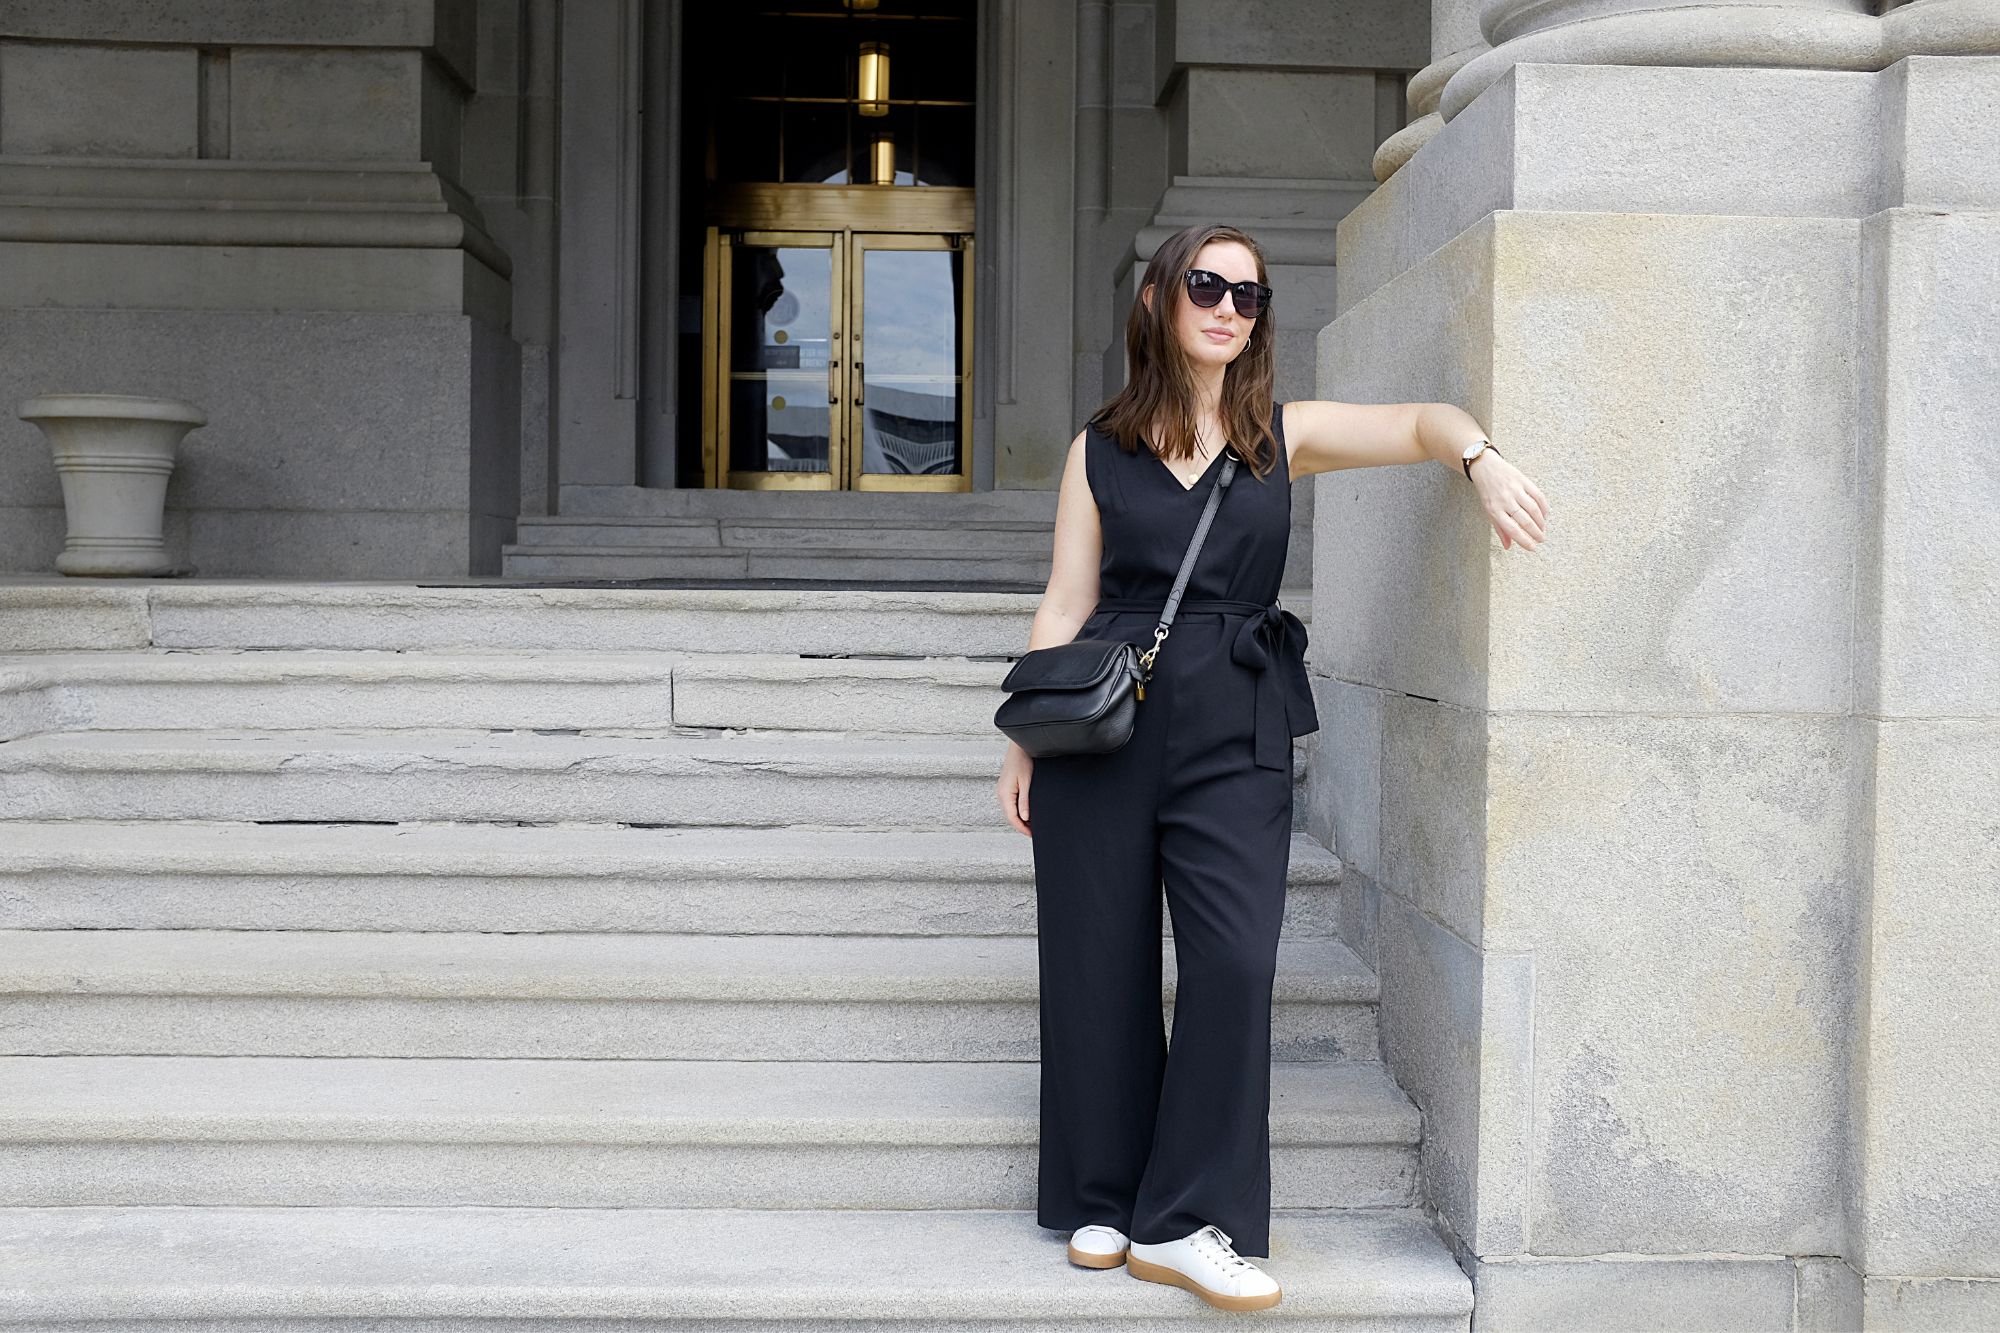 Alyssa stands by the NY State Capitol Building in a black jumpsuit